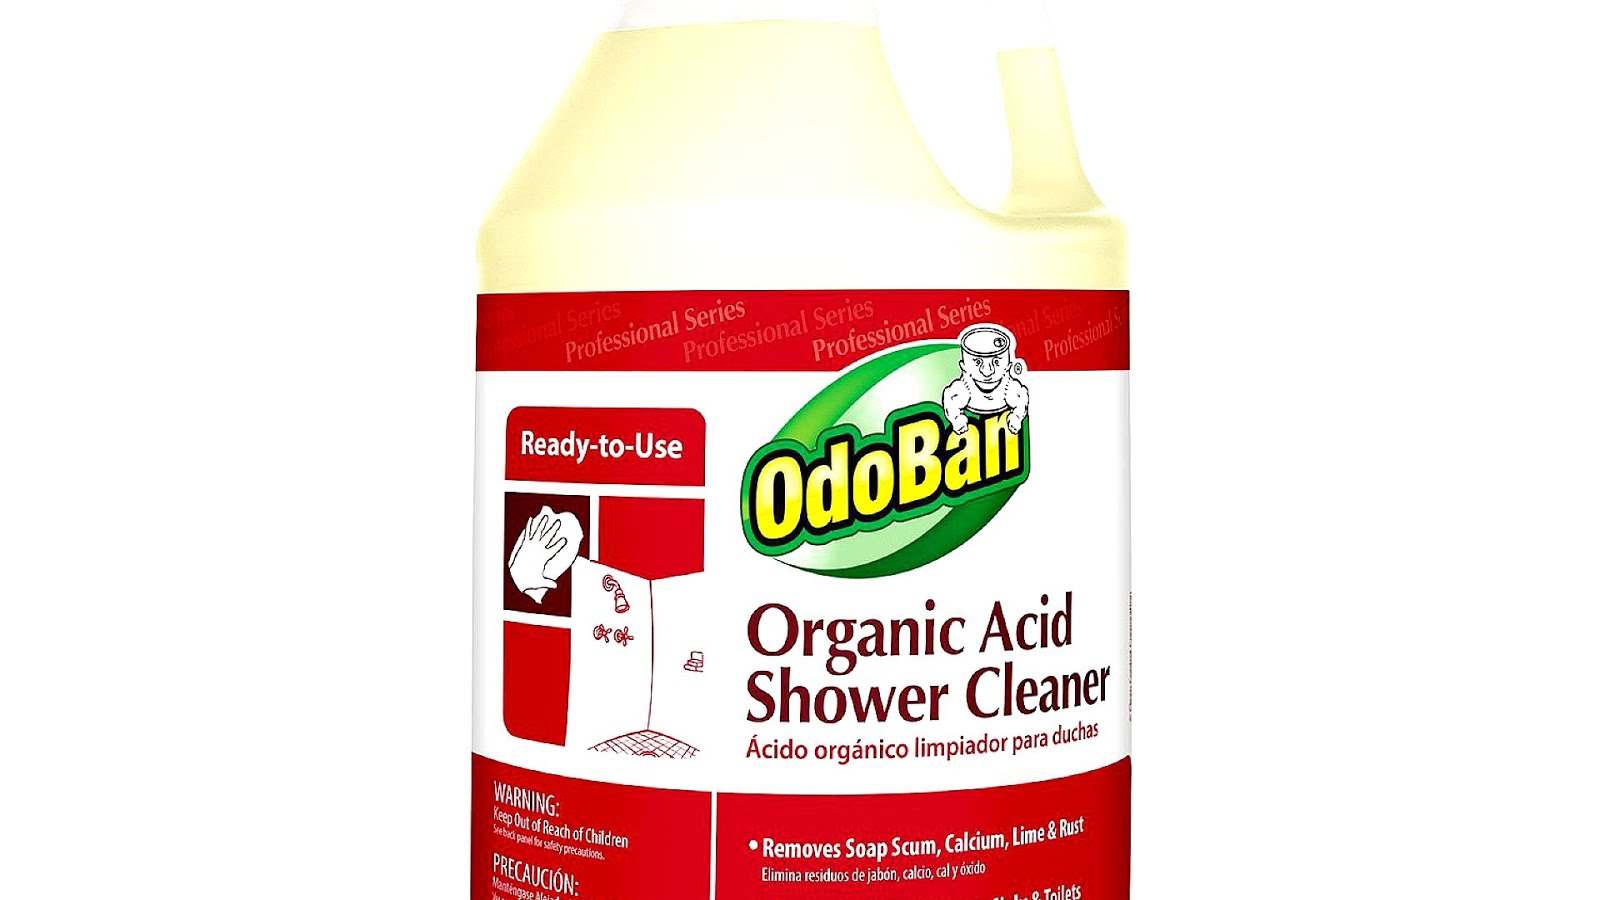 What are some of the most effective drain cleaners?